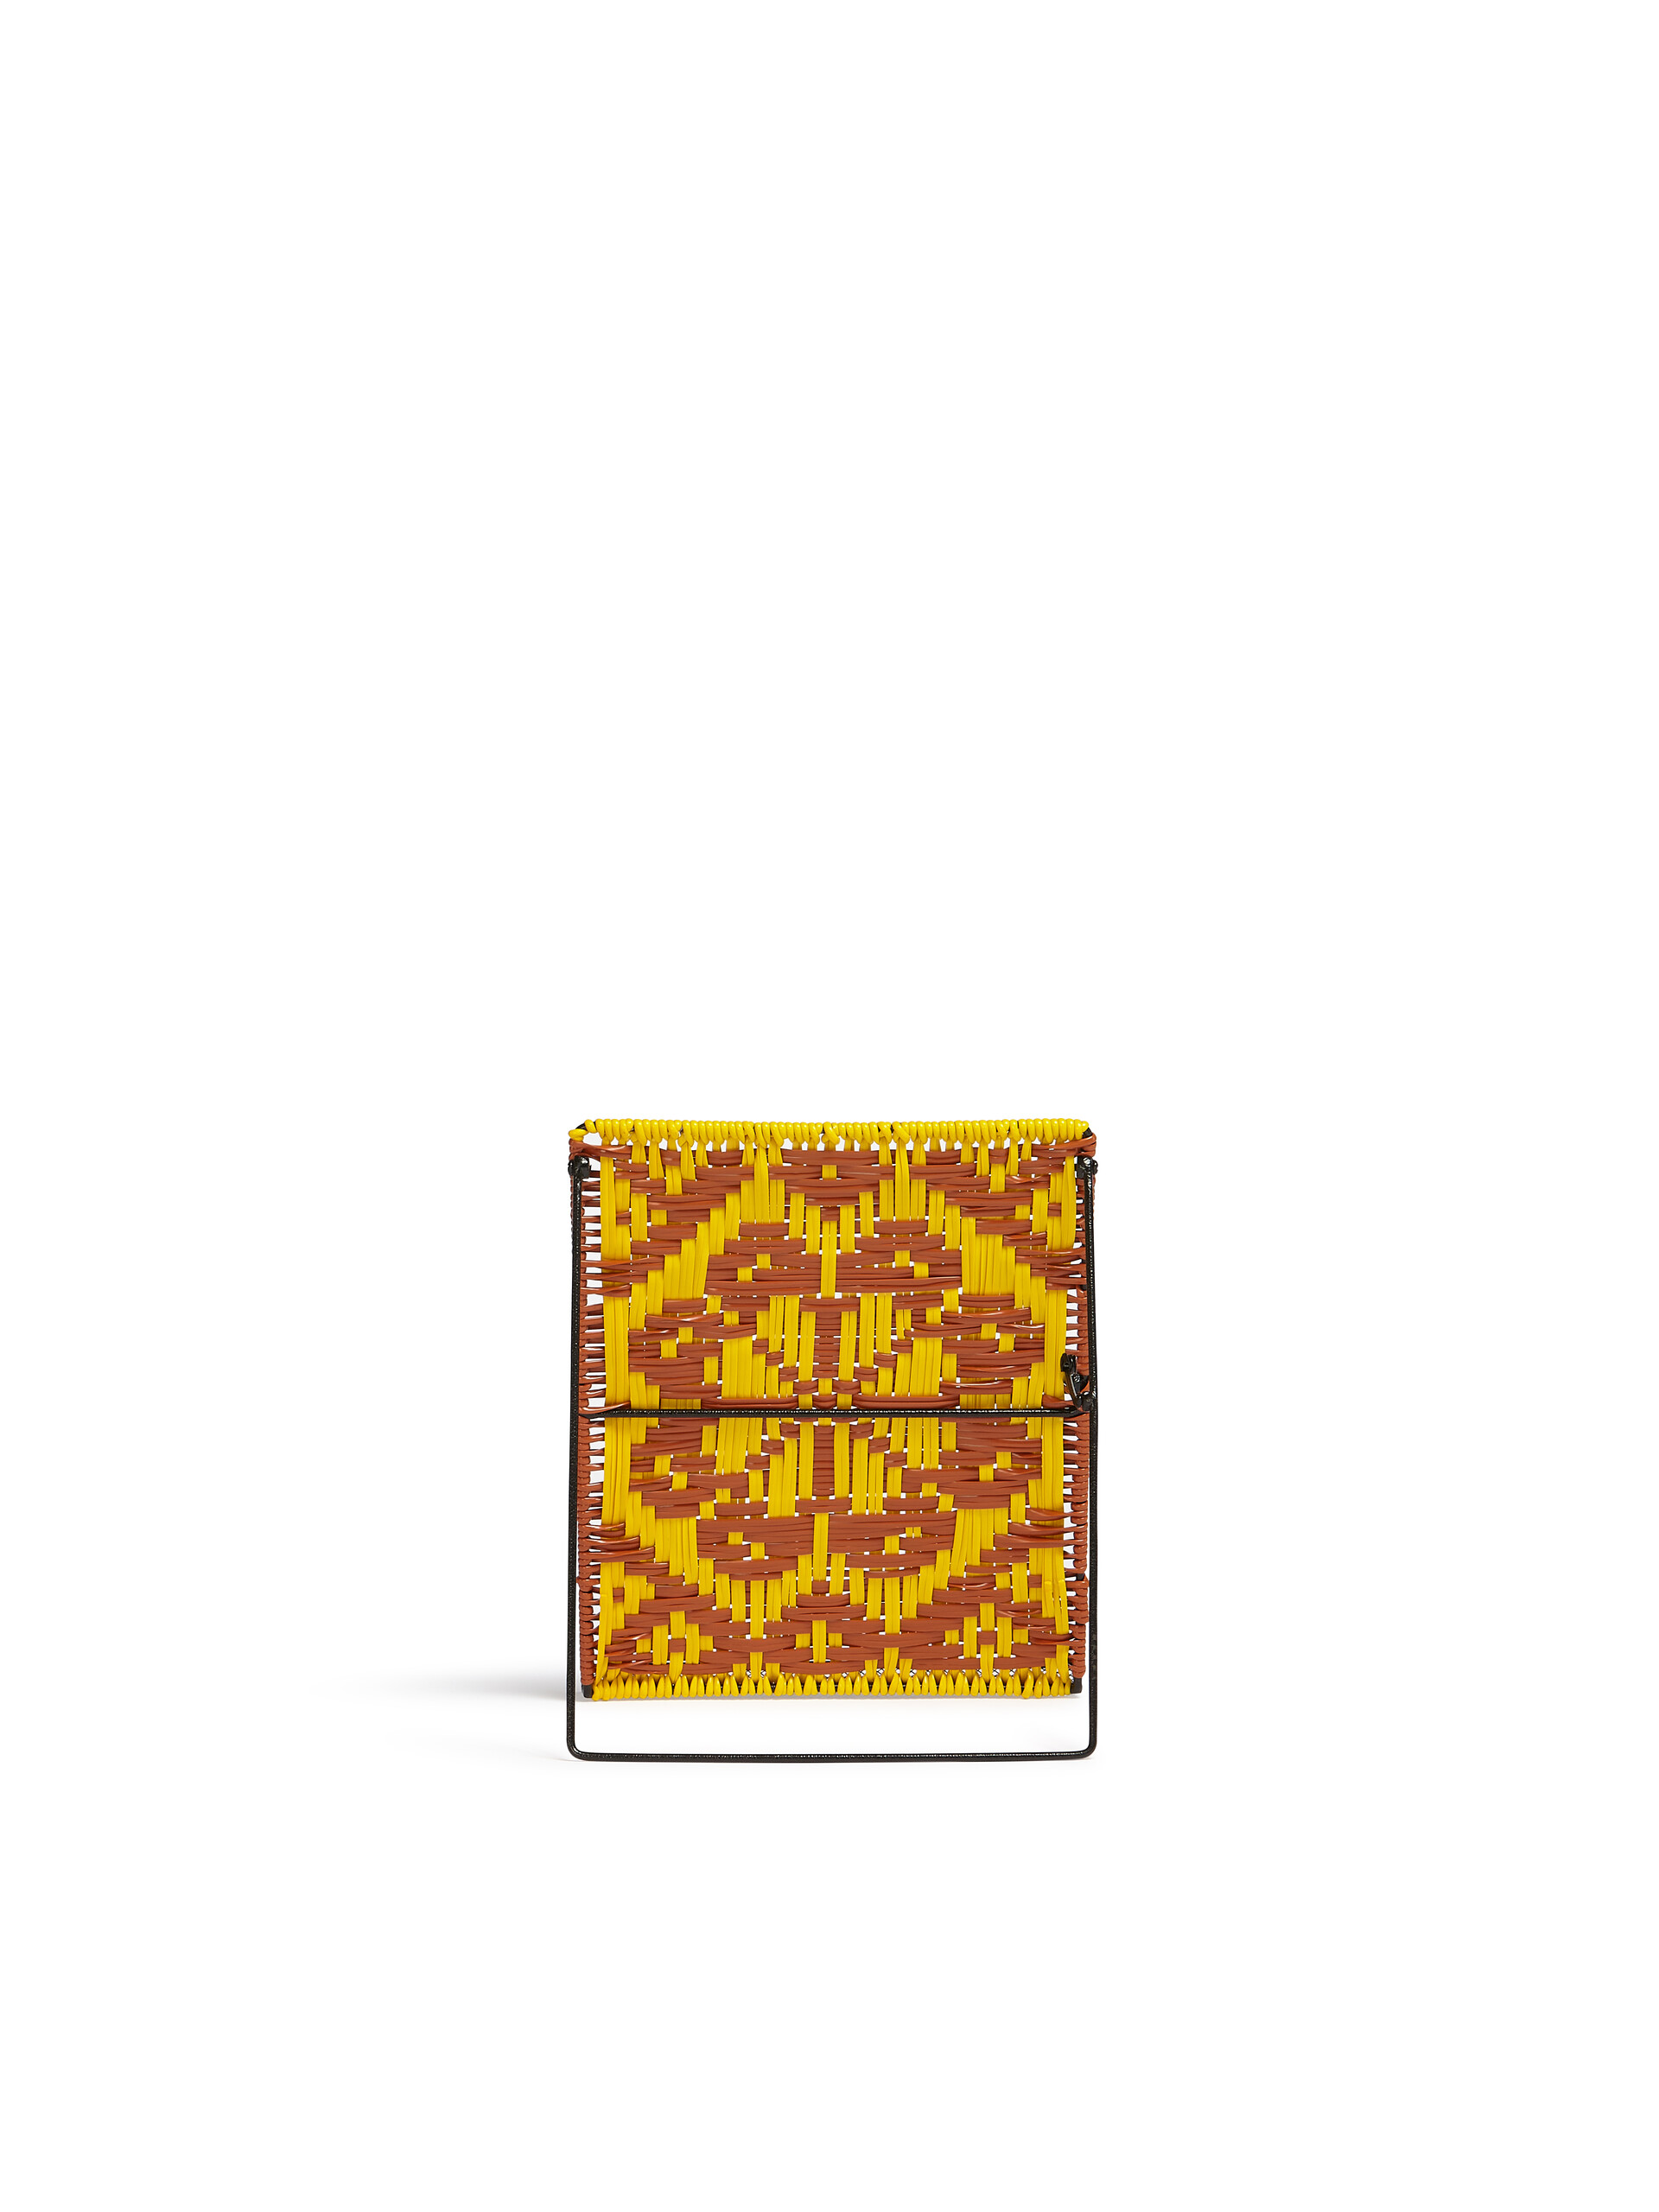 MARNI MARKET yellow and red woven iPad stand - Furniture - Image 3